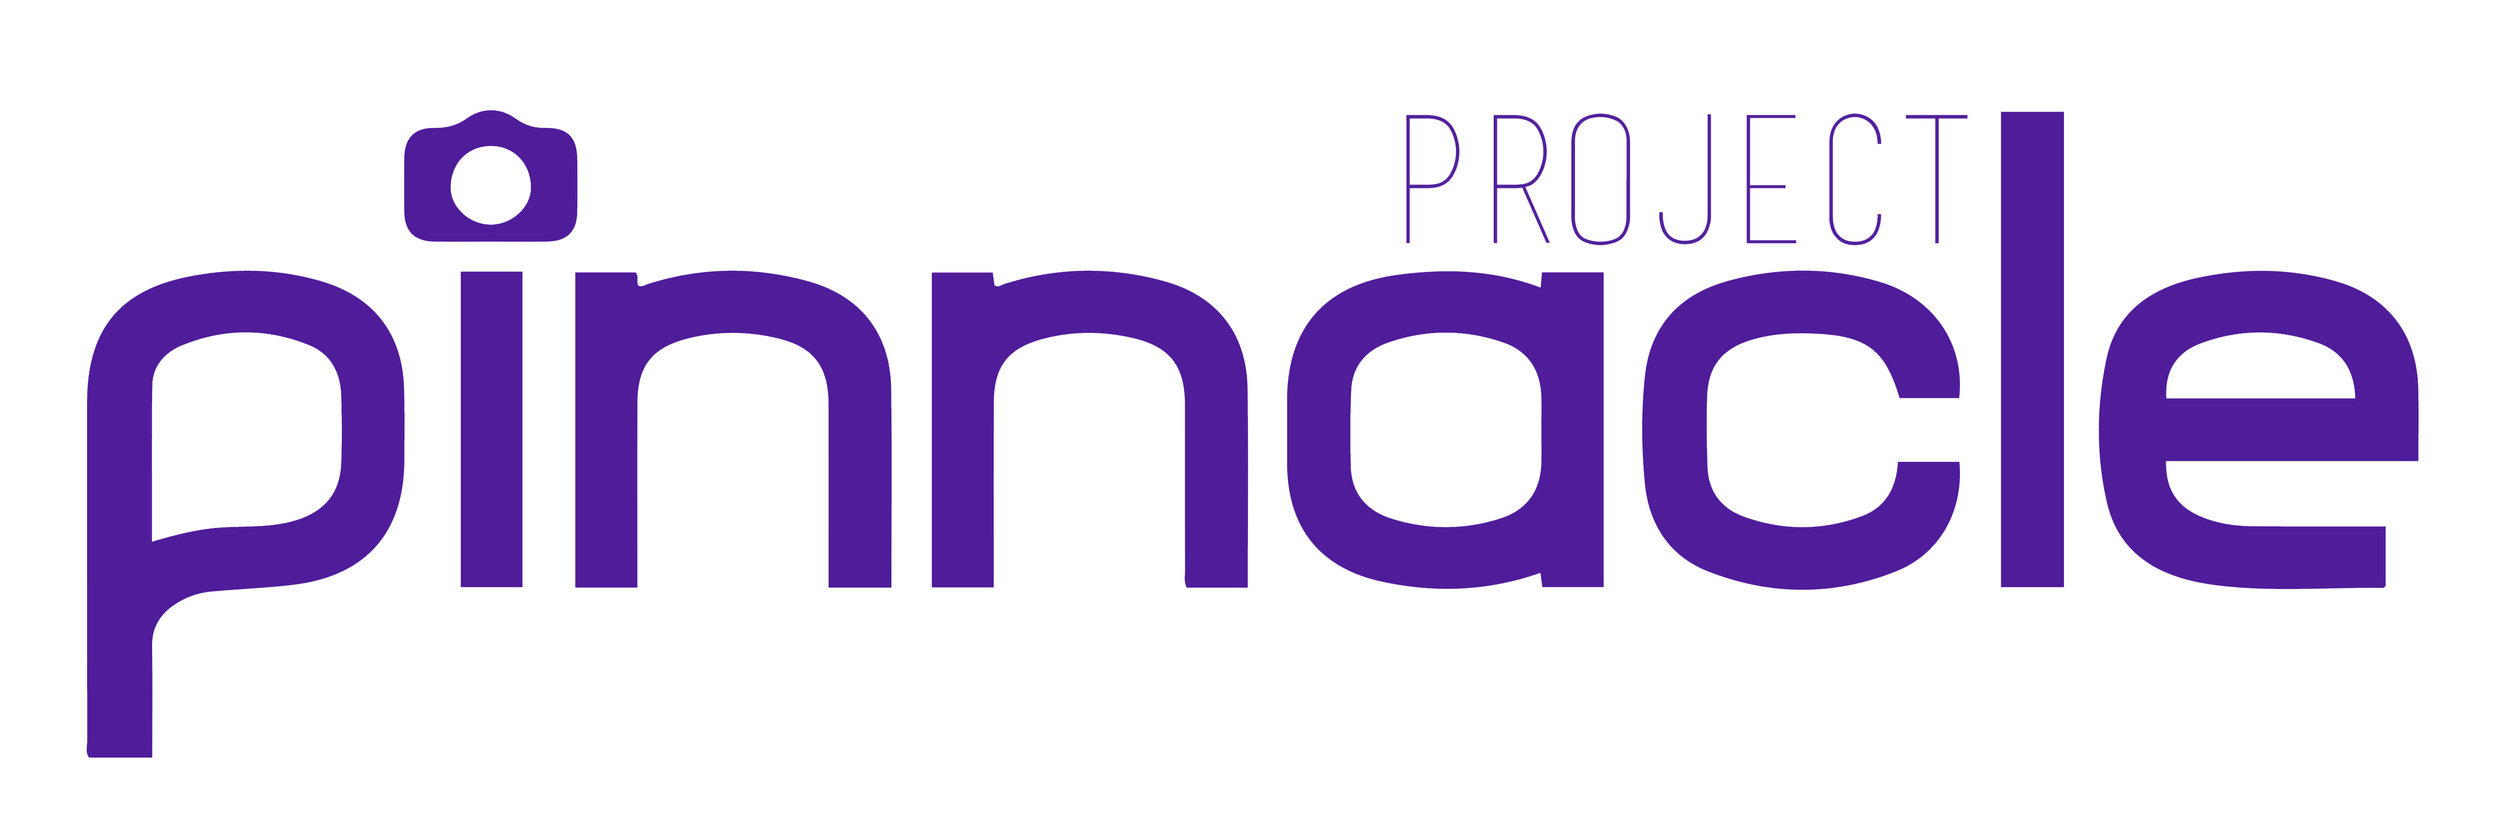 Logo Design for Project Pinnacle, part of SCAPE Accelerator 